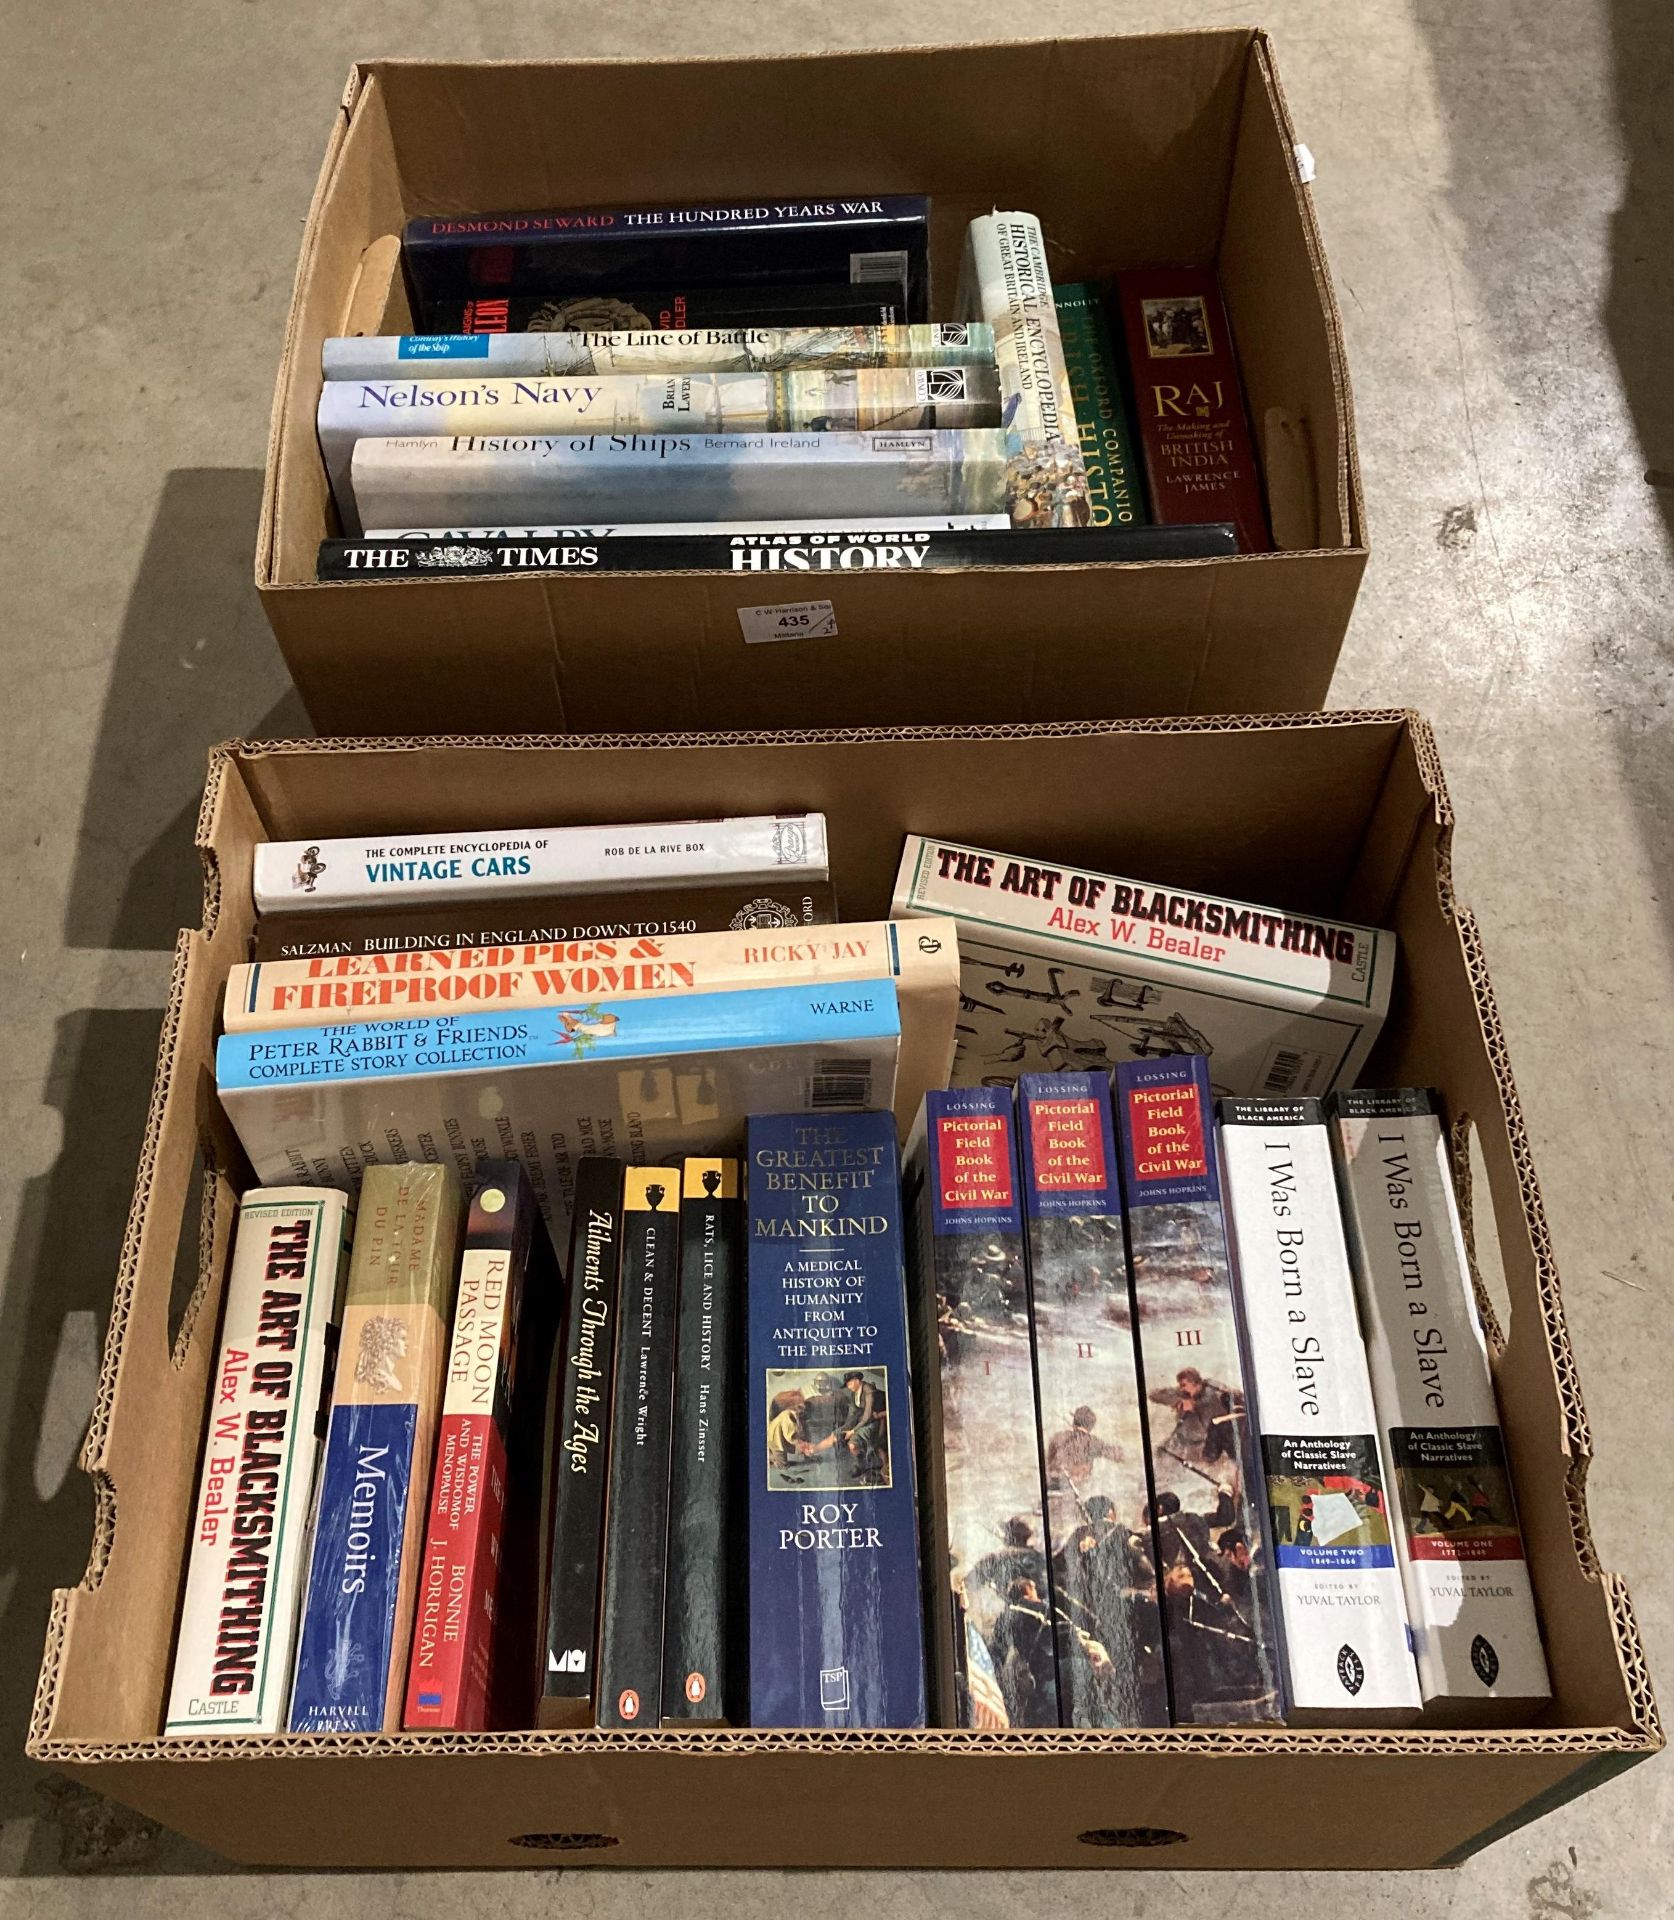 Contents to two boxes - approximately 29 assorted books on armies, Napoleon, civil wars,